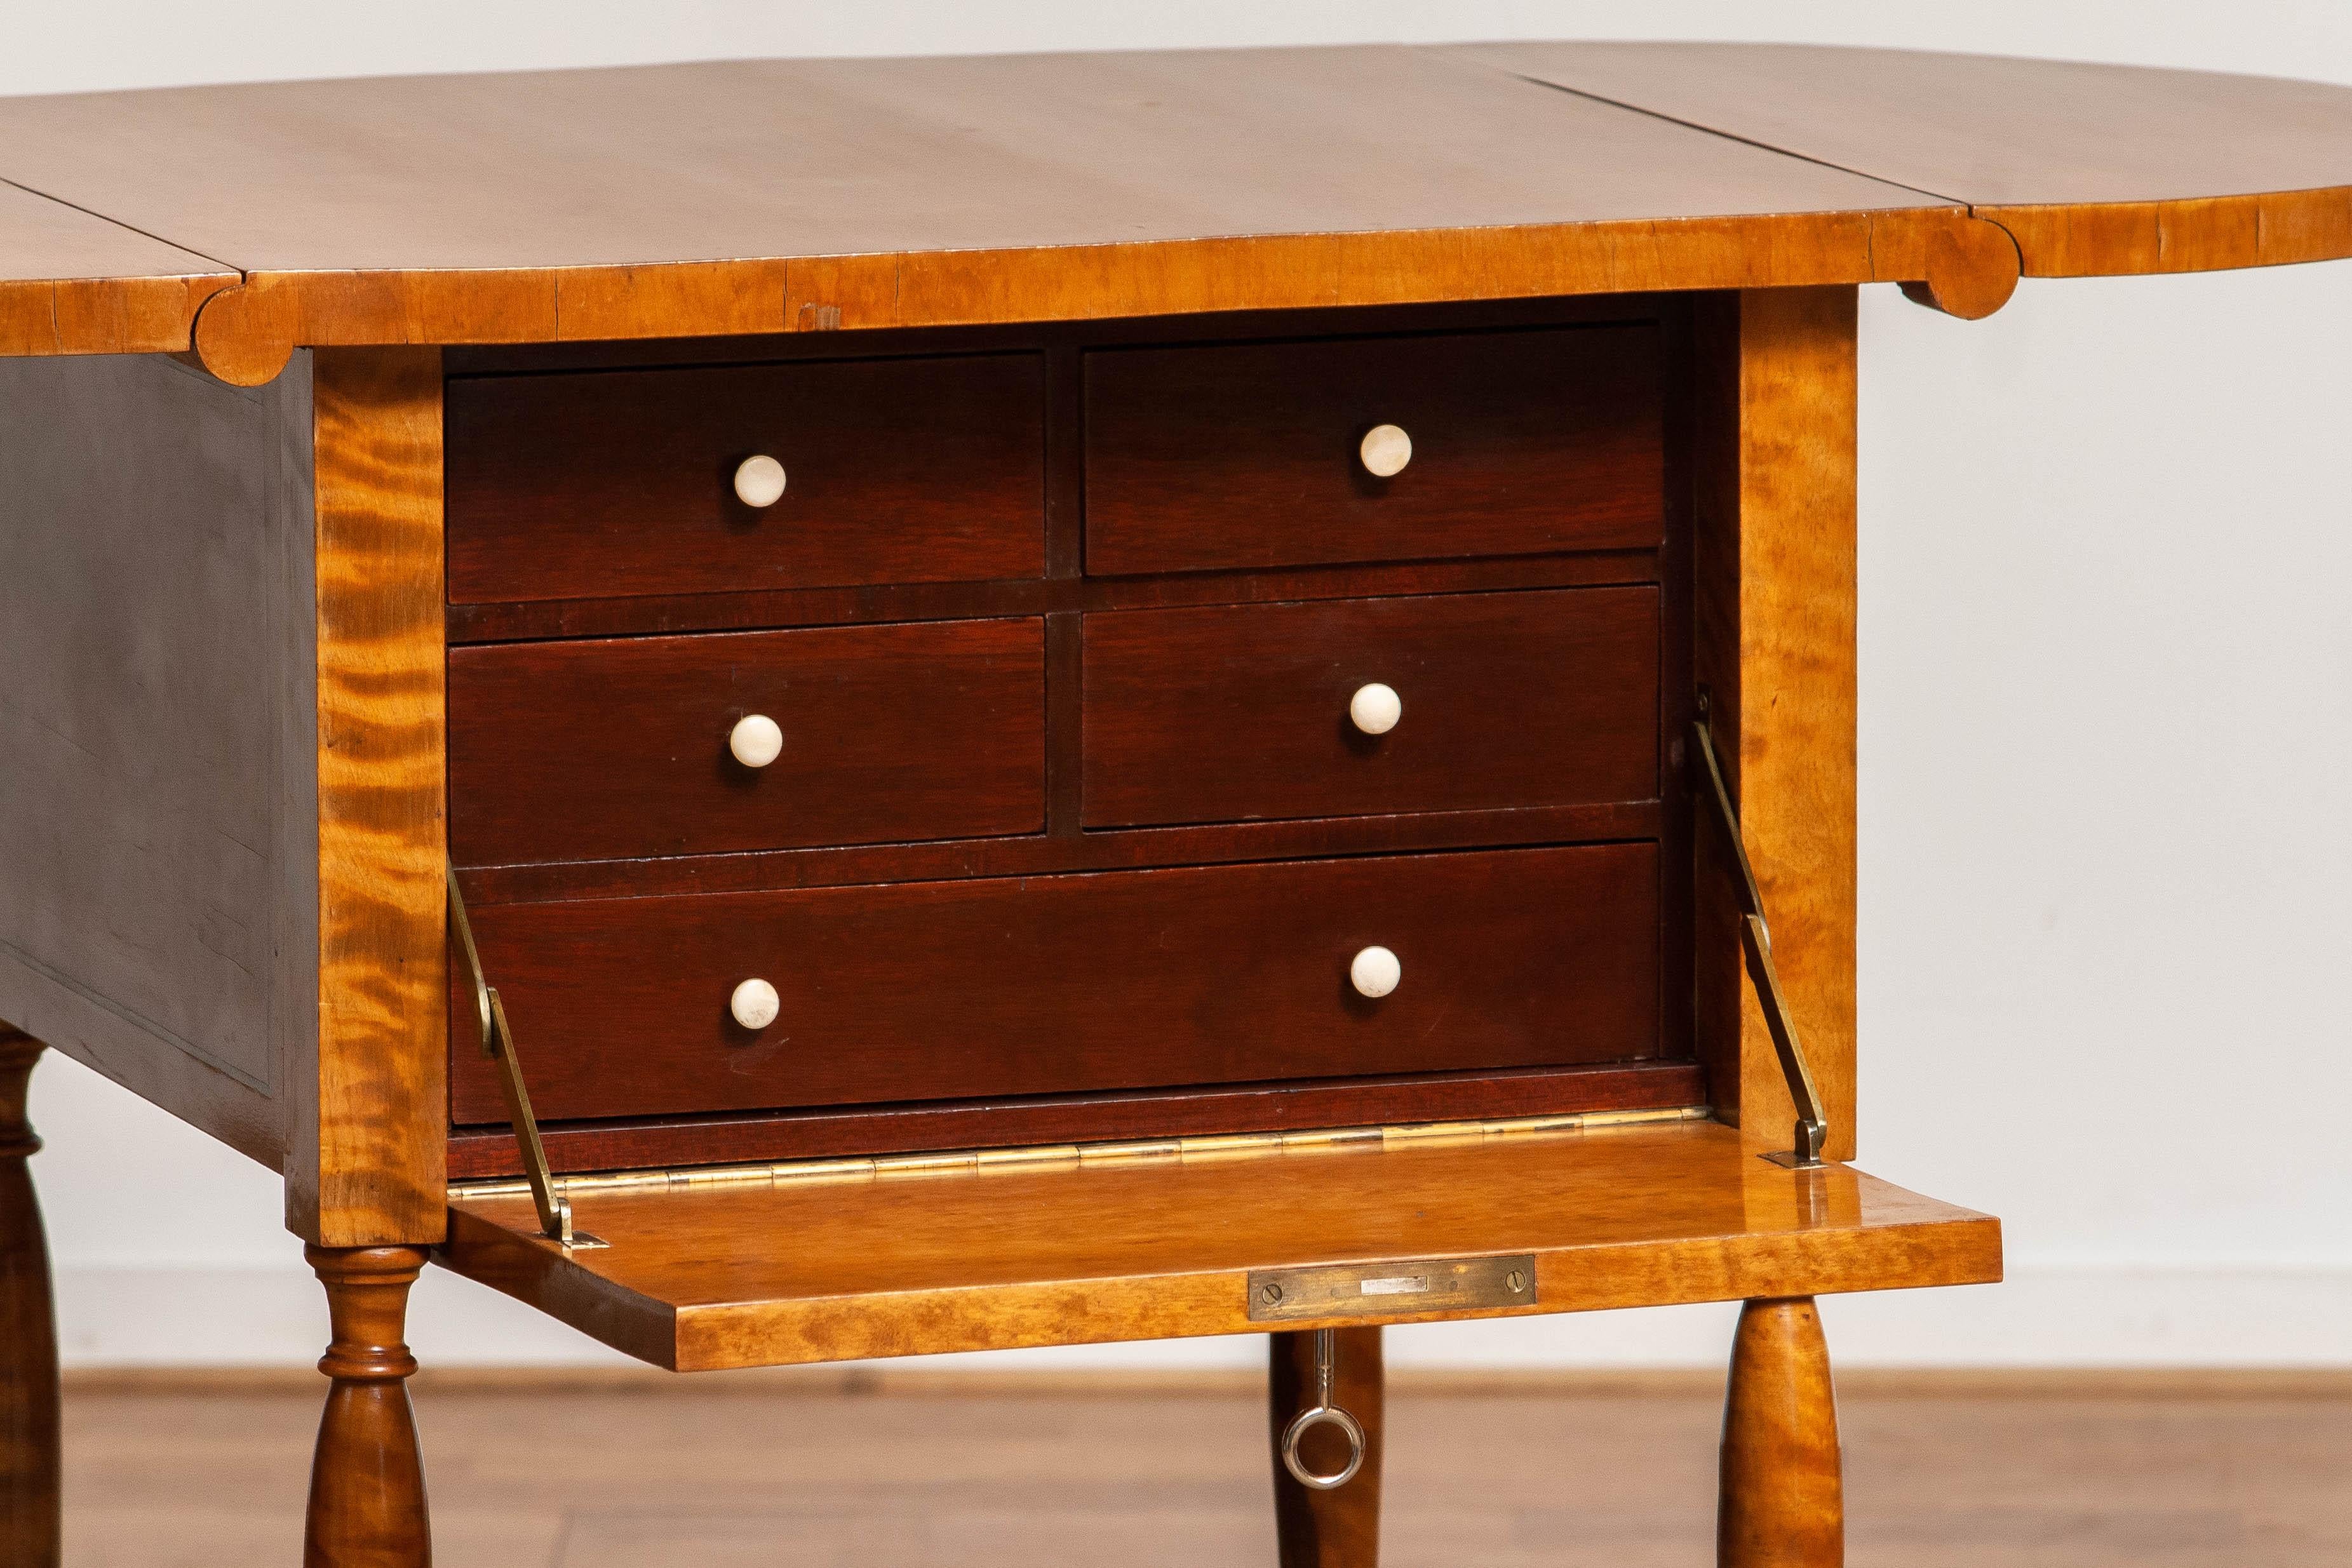 Early 20th Century Swedish Birch Drop-Leaf Pembroke Drawer Table In Good Condition For Sale In Silvolde, Gelderland